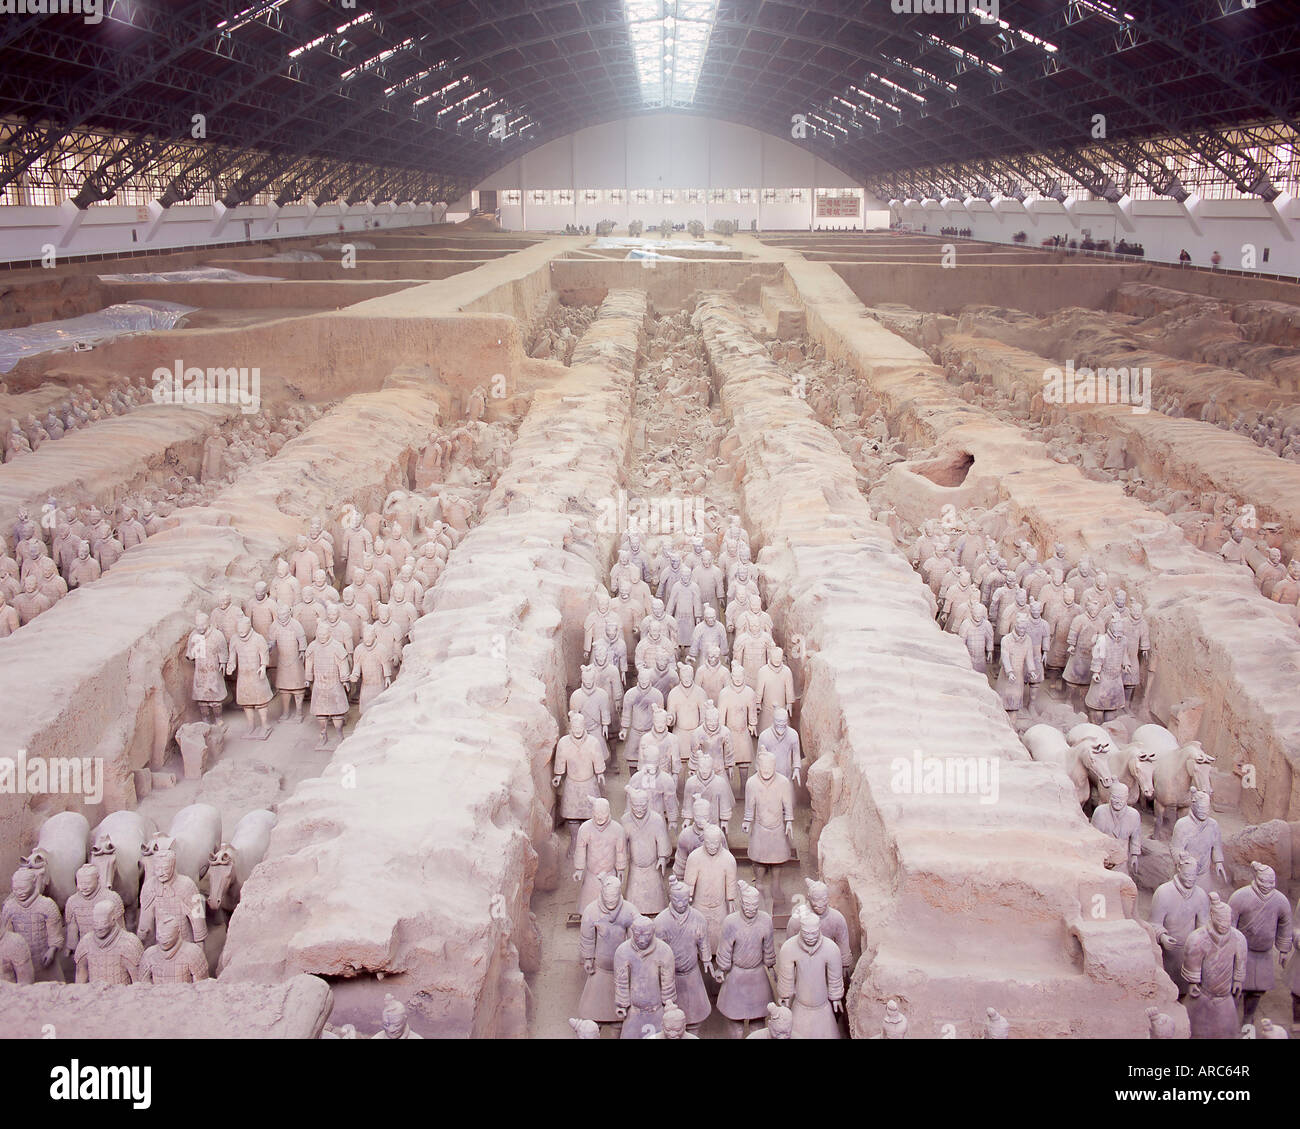 Six thousand terracotta figures two thousand years old, Army of Terracotta Warriors Stock Photo